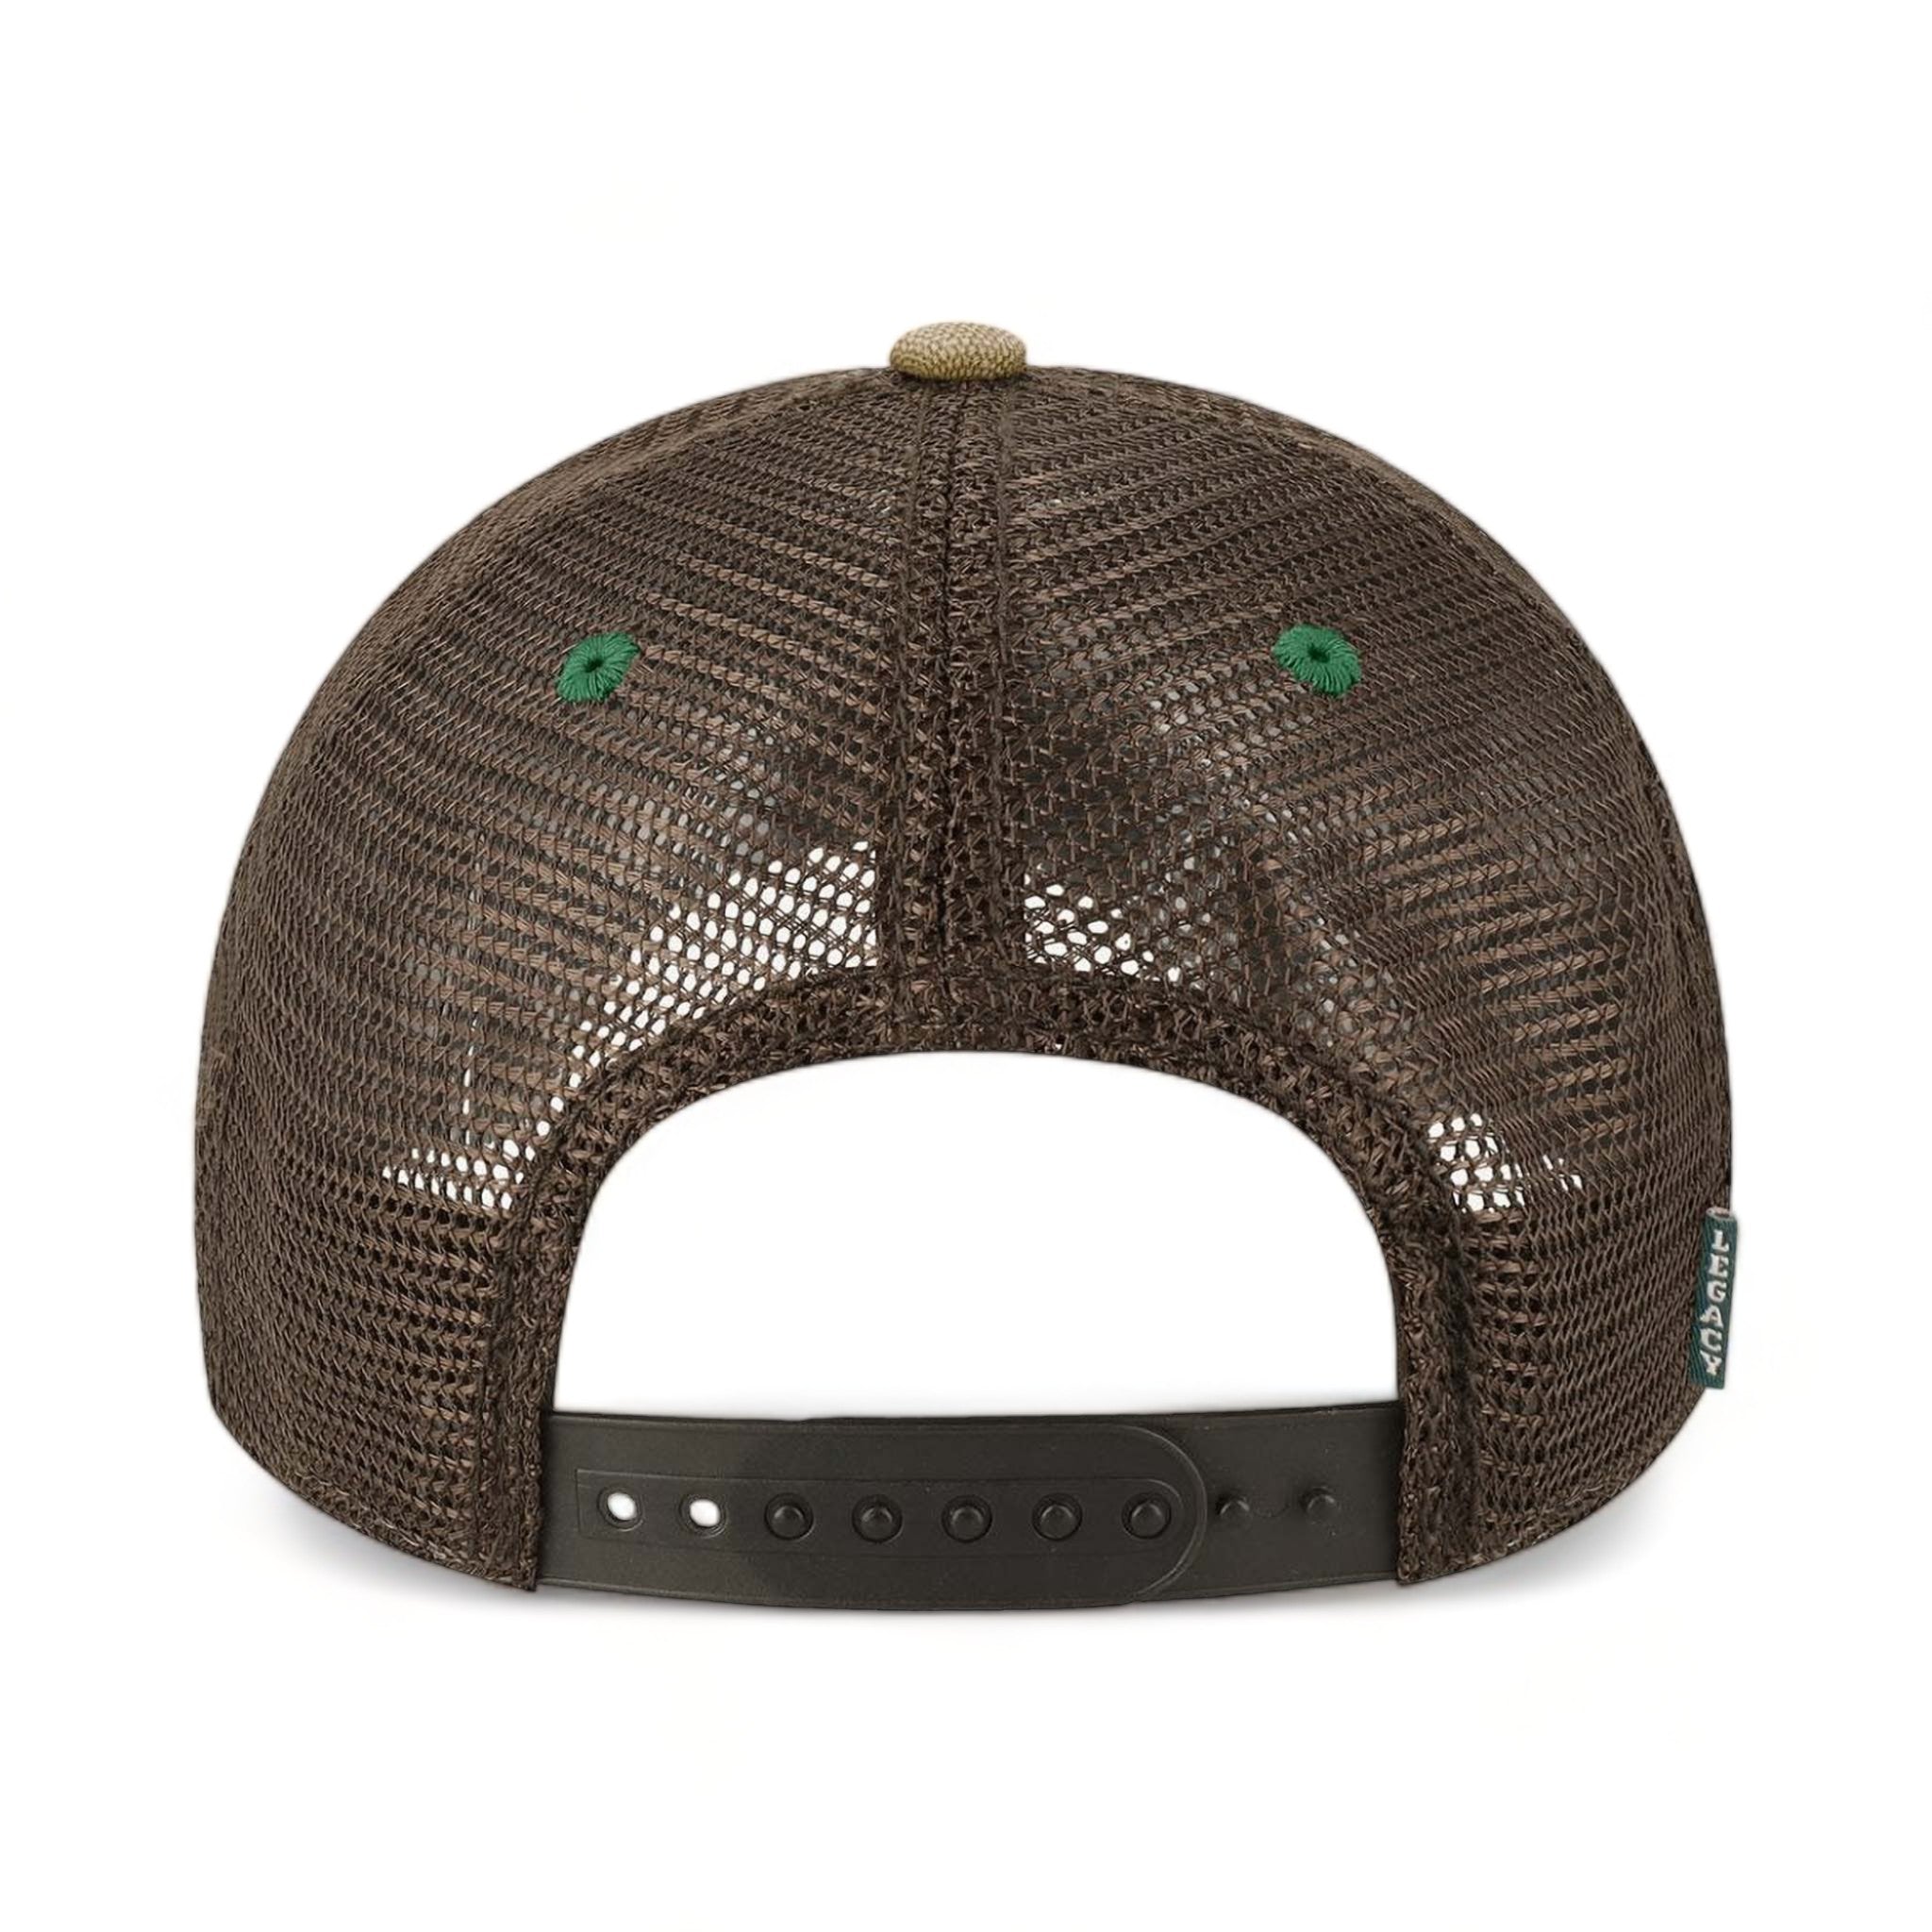 Back view of LEGACY DTA custom hat in green, camel and brown